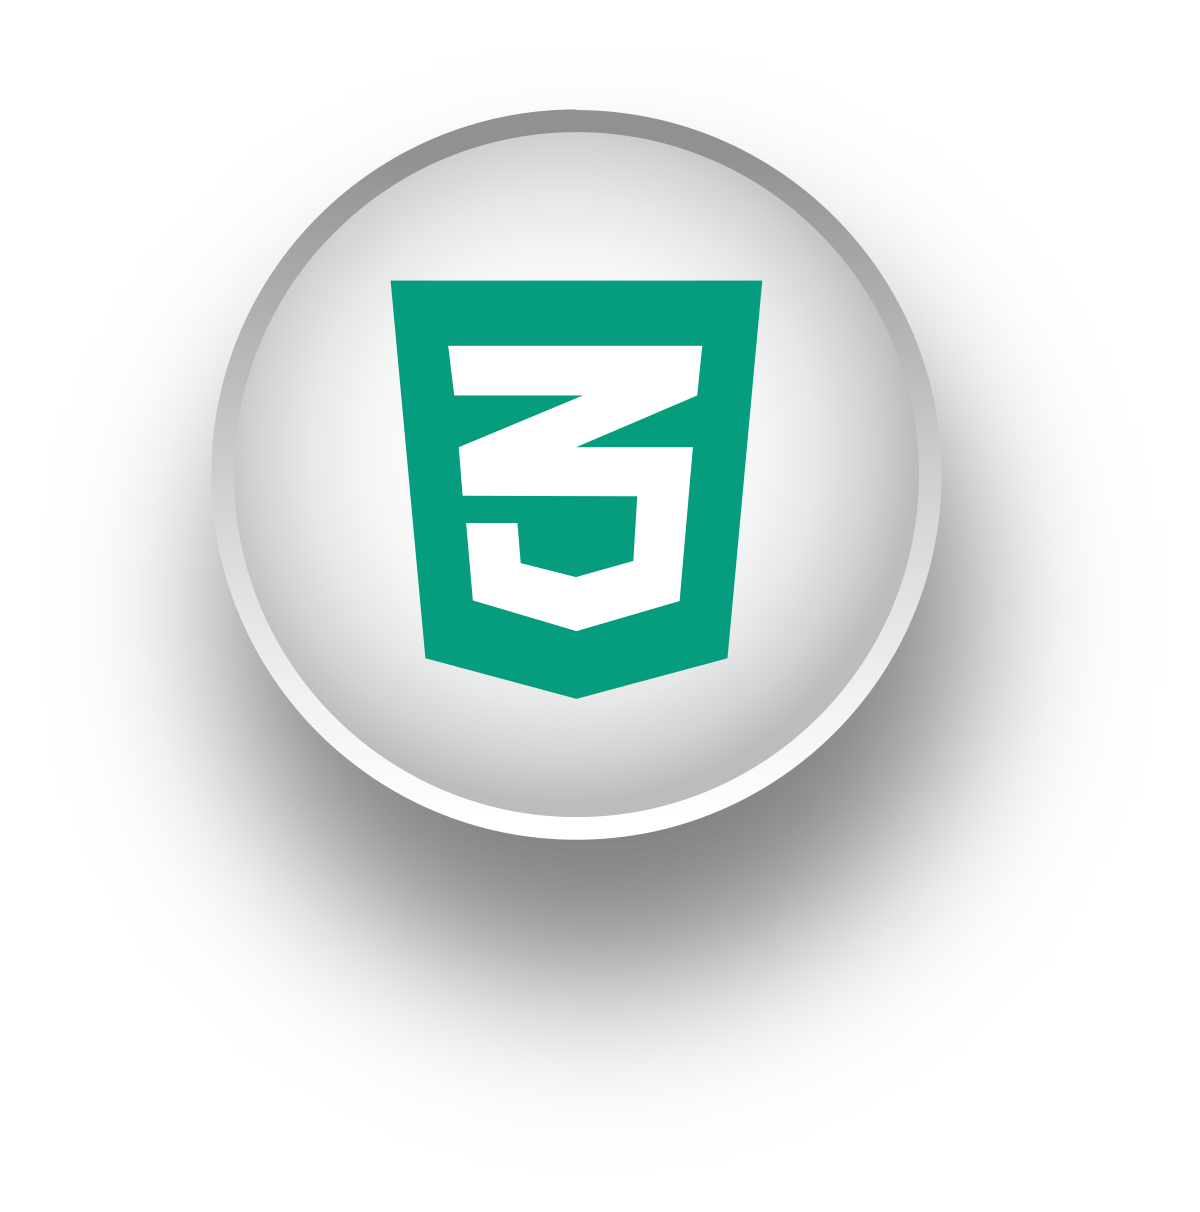 Download File:Css-icon.svg - Wikimedia Commons